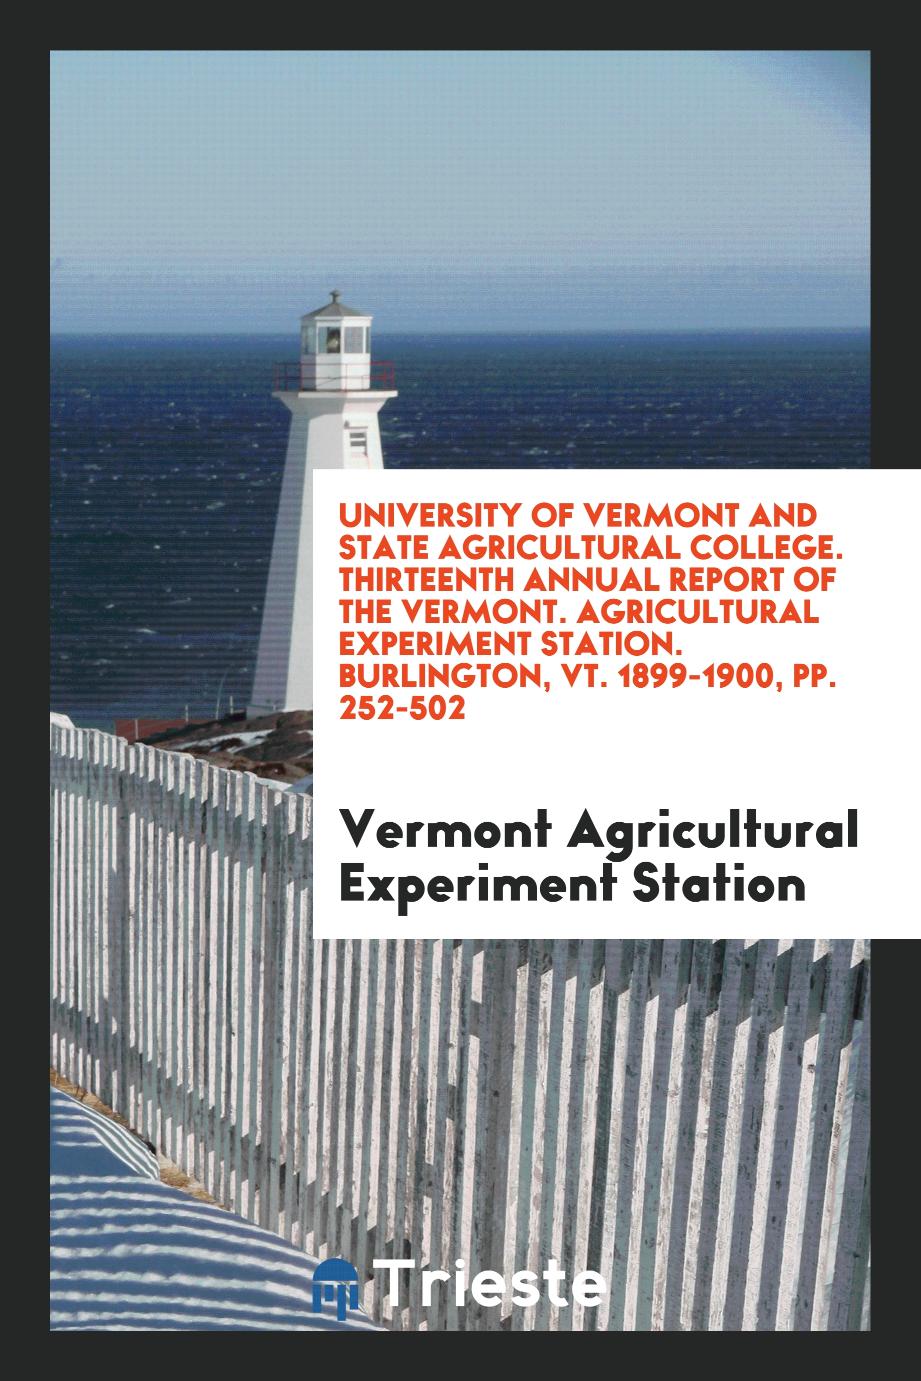 University of Vermont and State Agricultural College. Thirteenth Annual Report of the Vermont. Agricultural Experiment Station. Burlington, Vt. 1899-1900, pp. 252-502